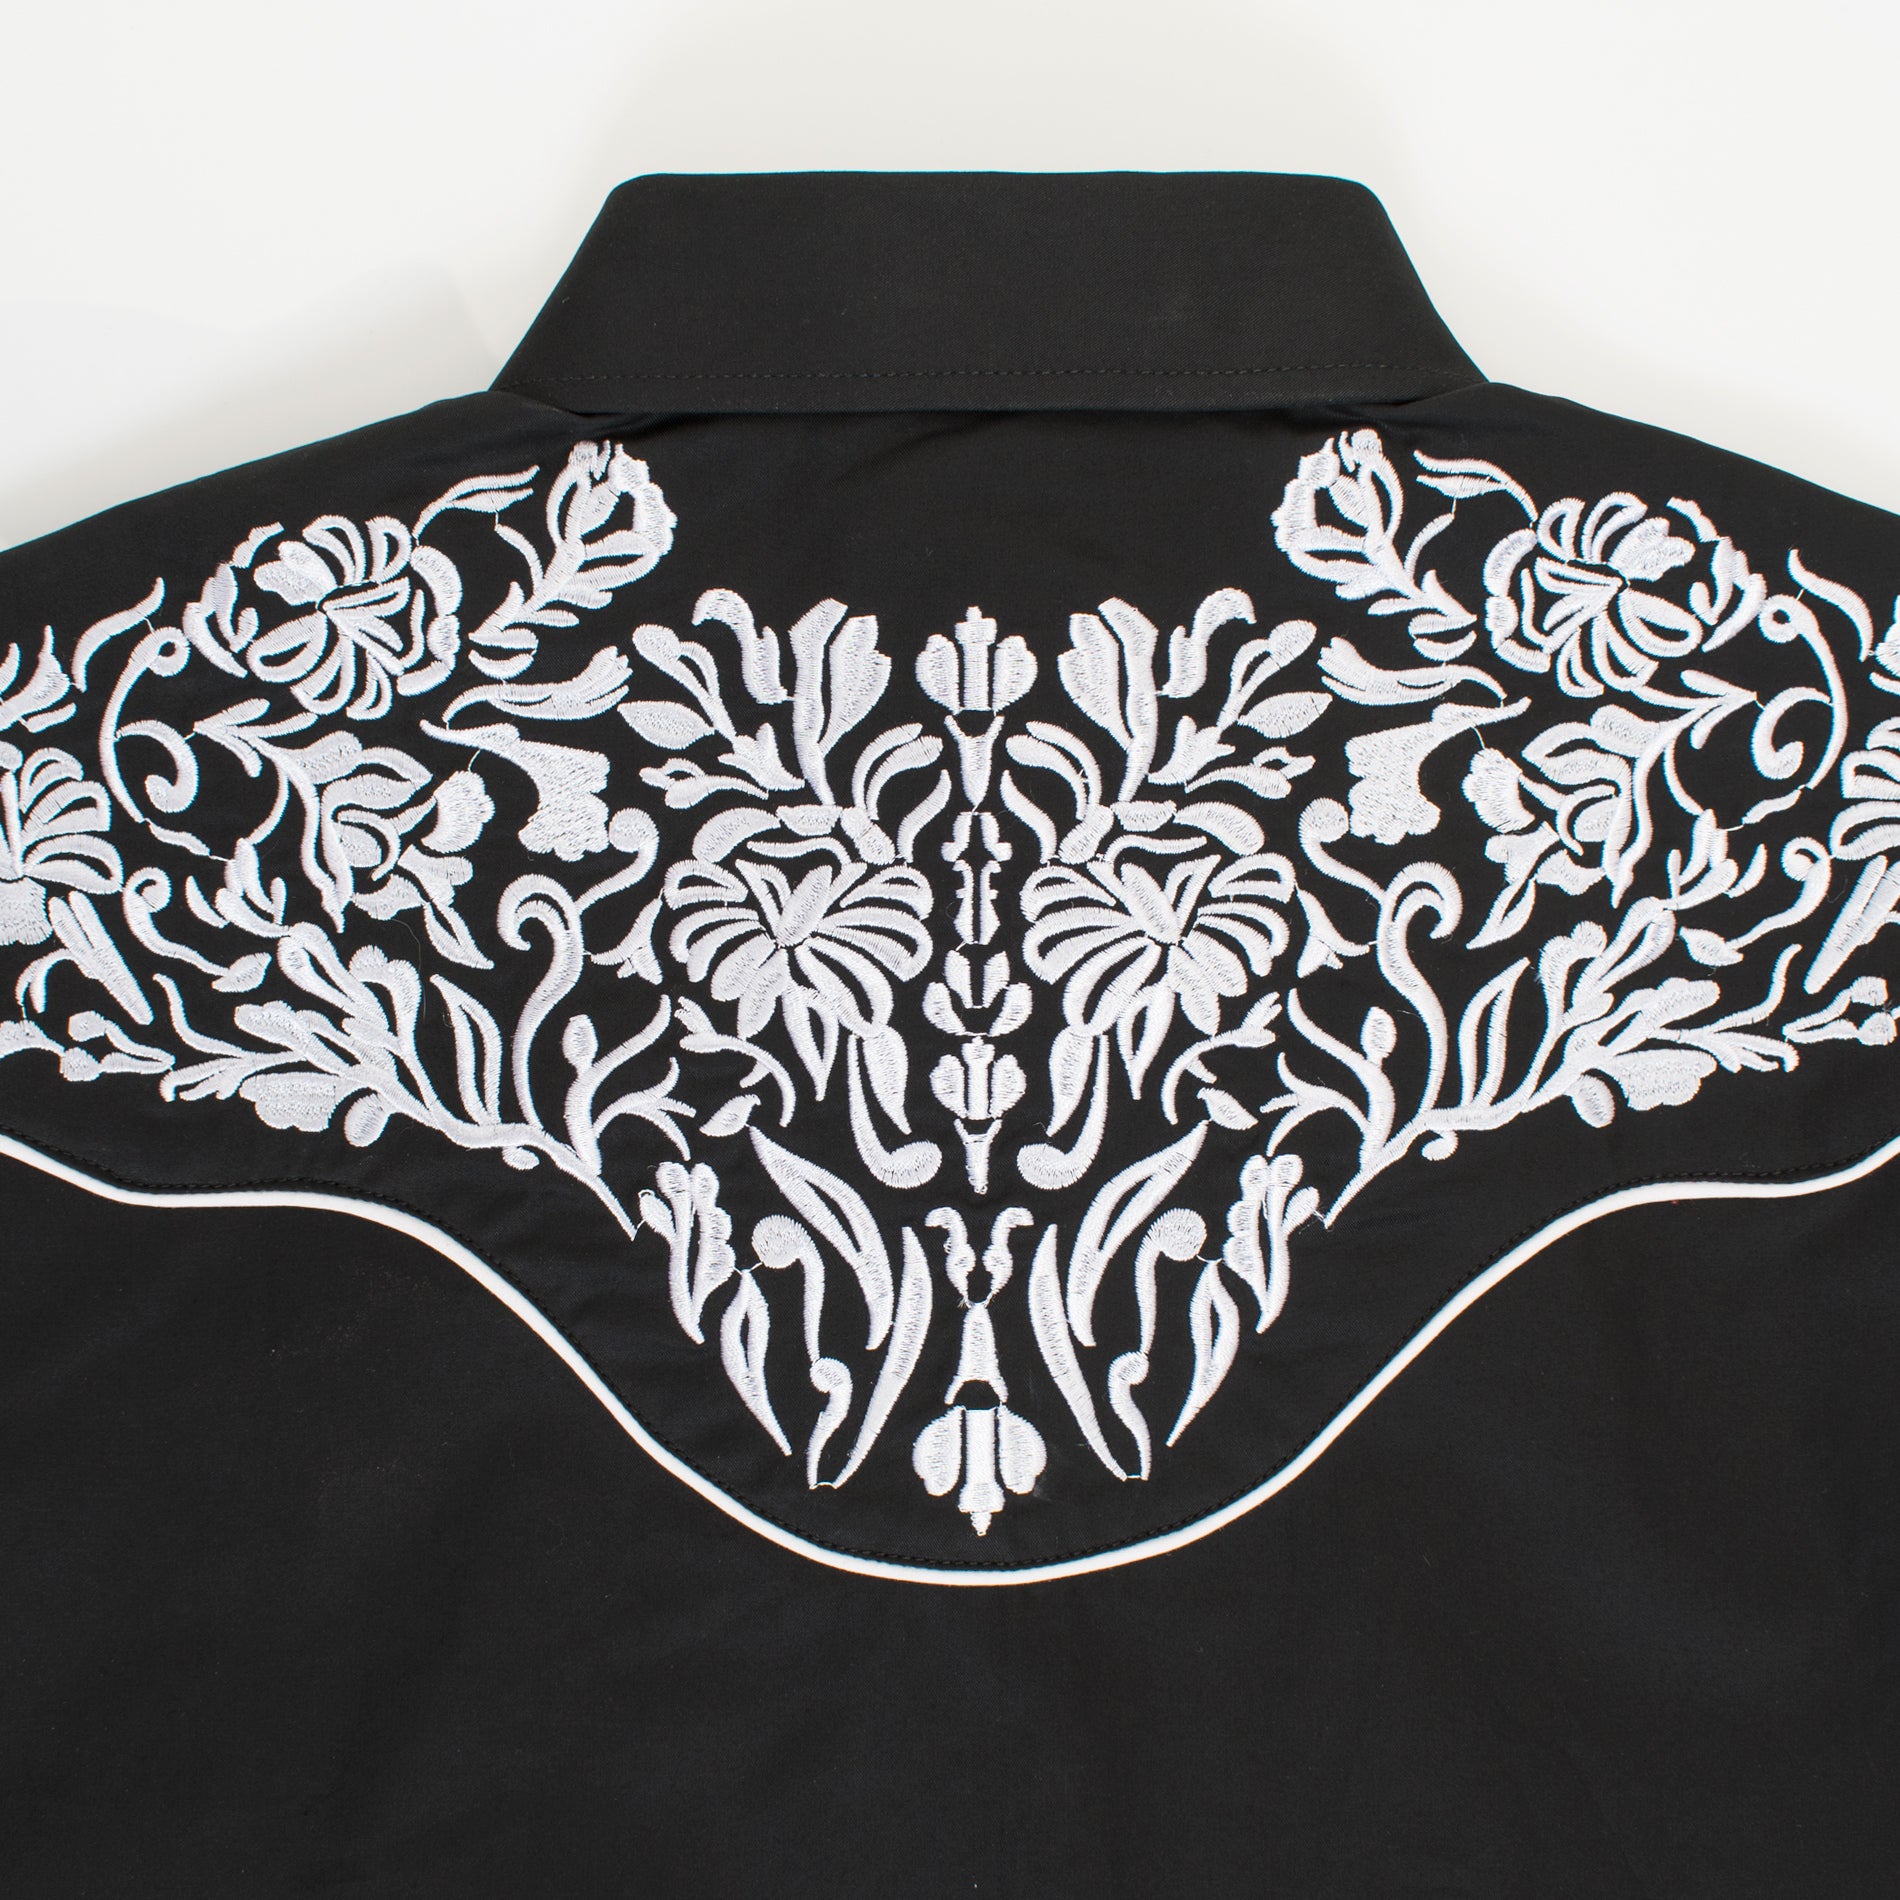 Women’s Western Embroidered Shirts-LS500-516